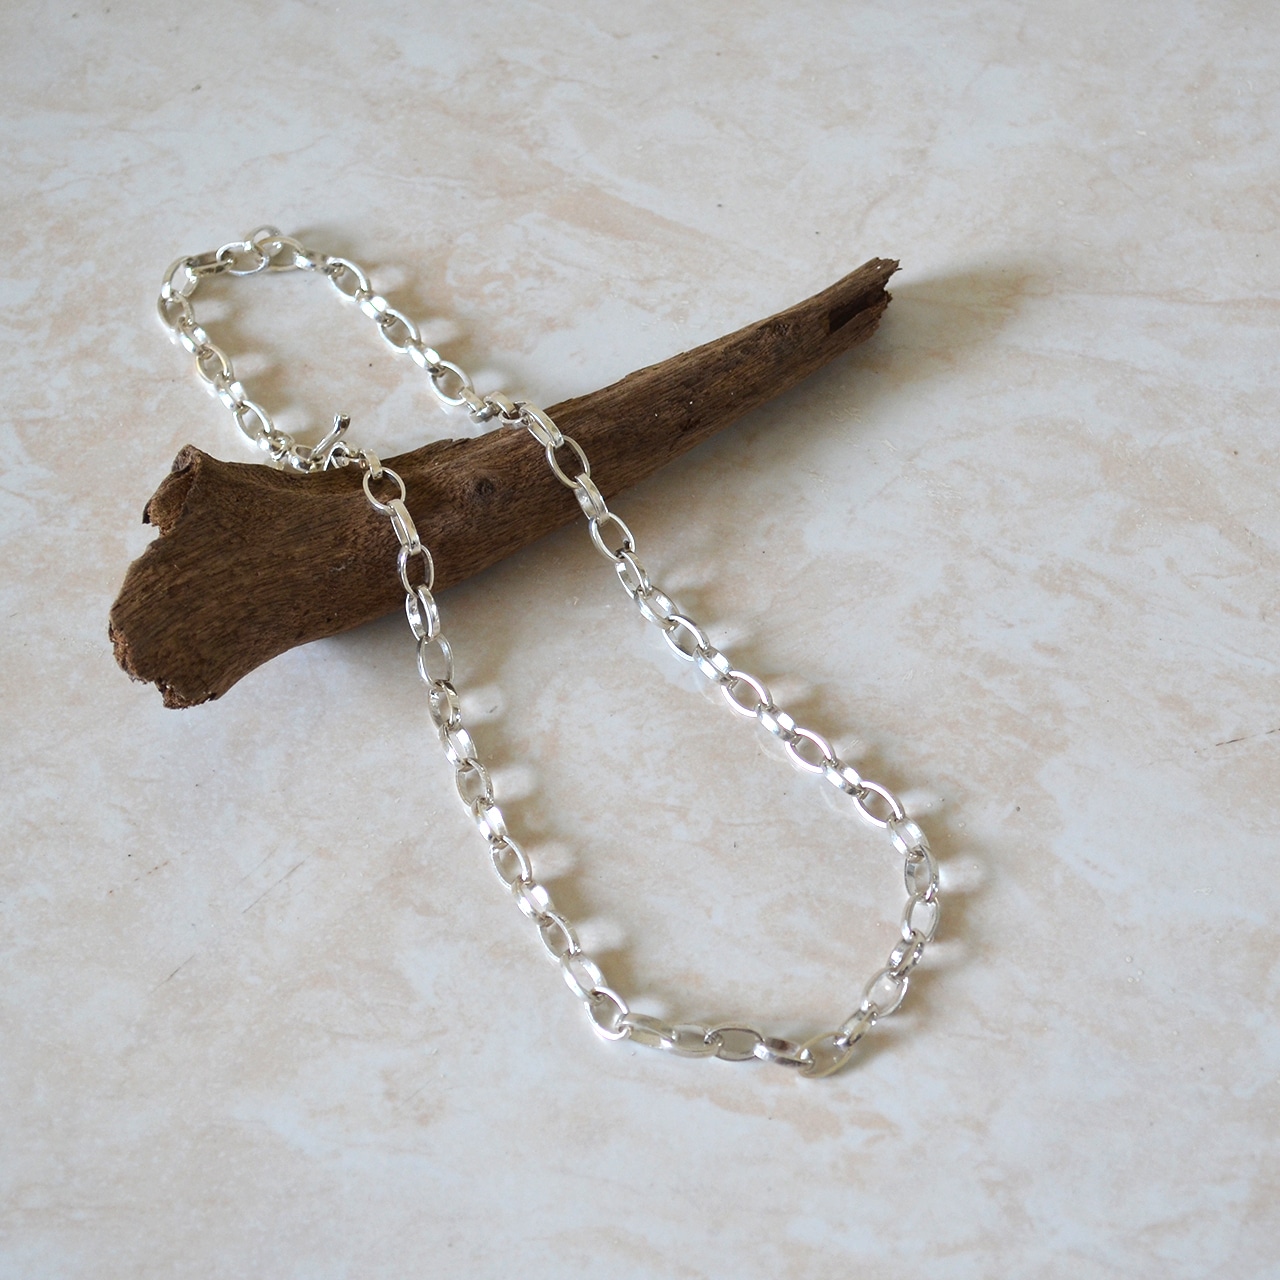 New Oval Link  Chain Necklace (50cm)